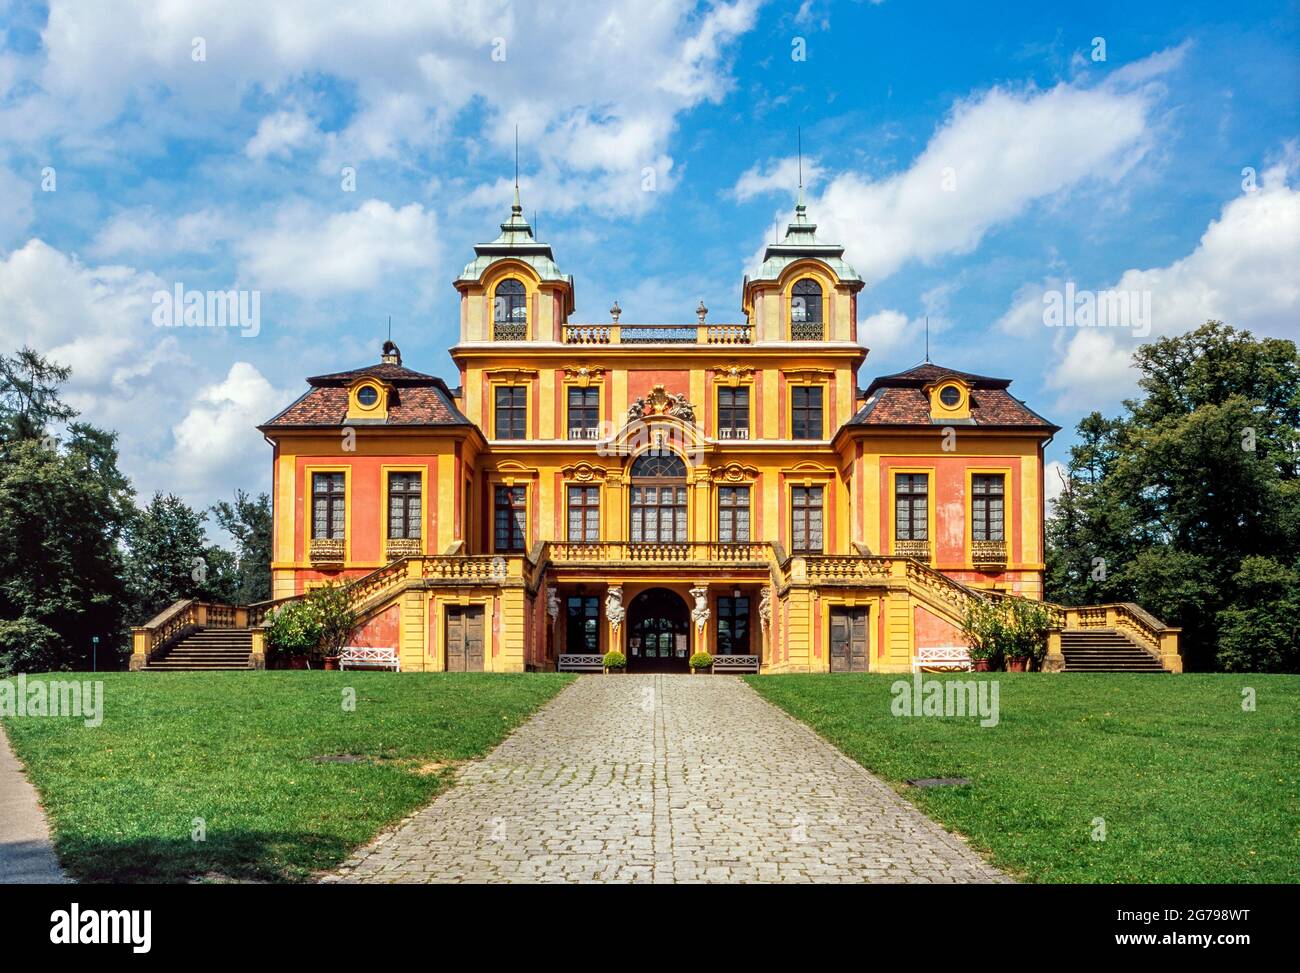 Schloss Favorite is a baroque pleasure and hunting lodge. It is located on a hill in the Favoritepark in the direct axis north of the Ludwigsburg residential palace. It was built in the years 1717 - 1723 by Duke Eberhard Ludwig according to designs by the court architect Donato Giuseppe Frisoni in the Baroque style. Stock Photo